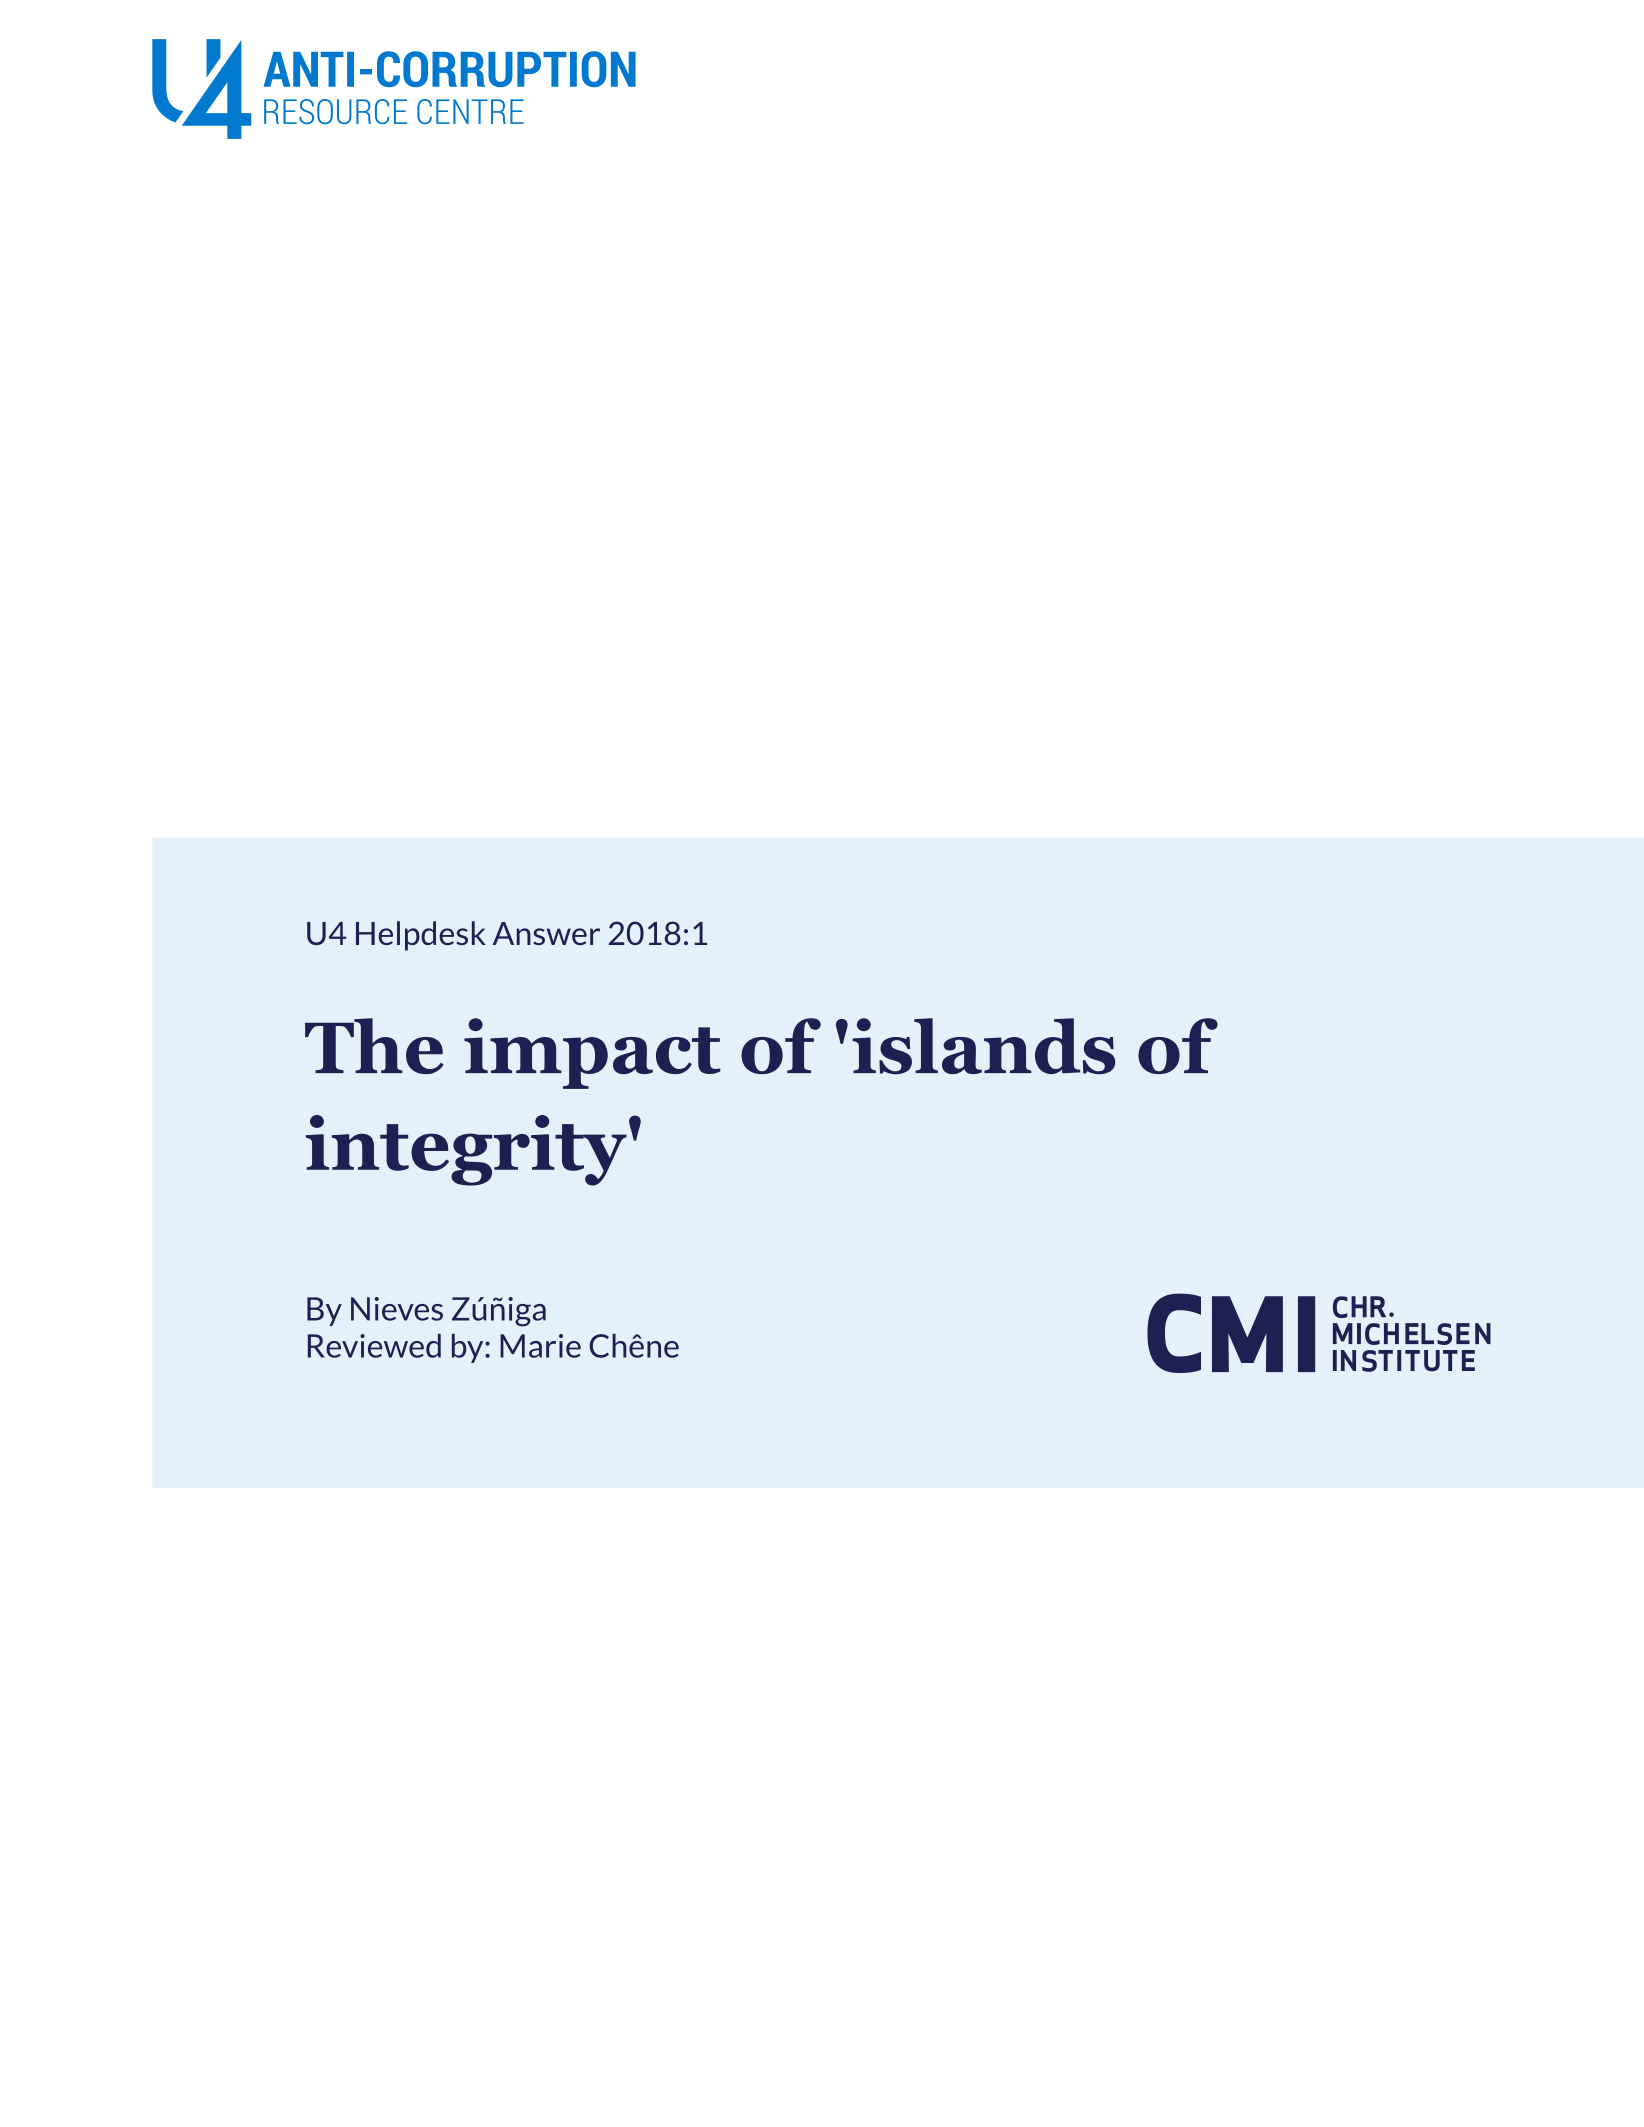 The impact of 'islands of integrity'